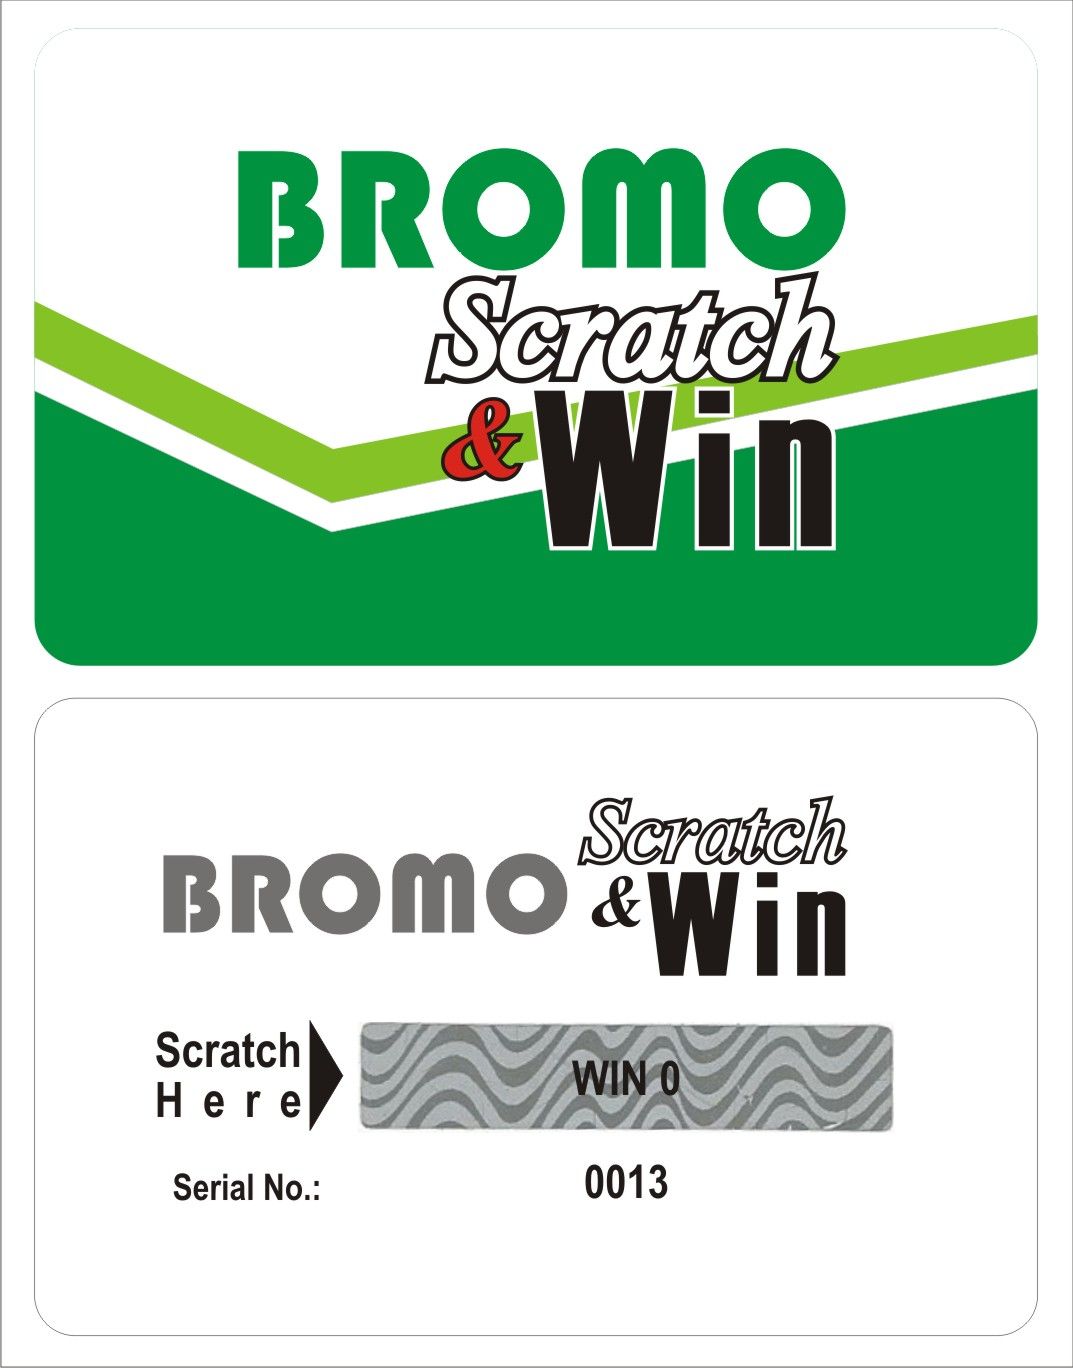 CALL EMMANUEL ON 08176499649 TO PRINT SCRATCH AND WIN PROMO CARDS, LOTTERY CARDS, GIFT CARDS ETC IN LAGOS NIGERIA